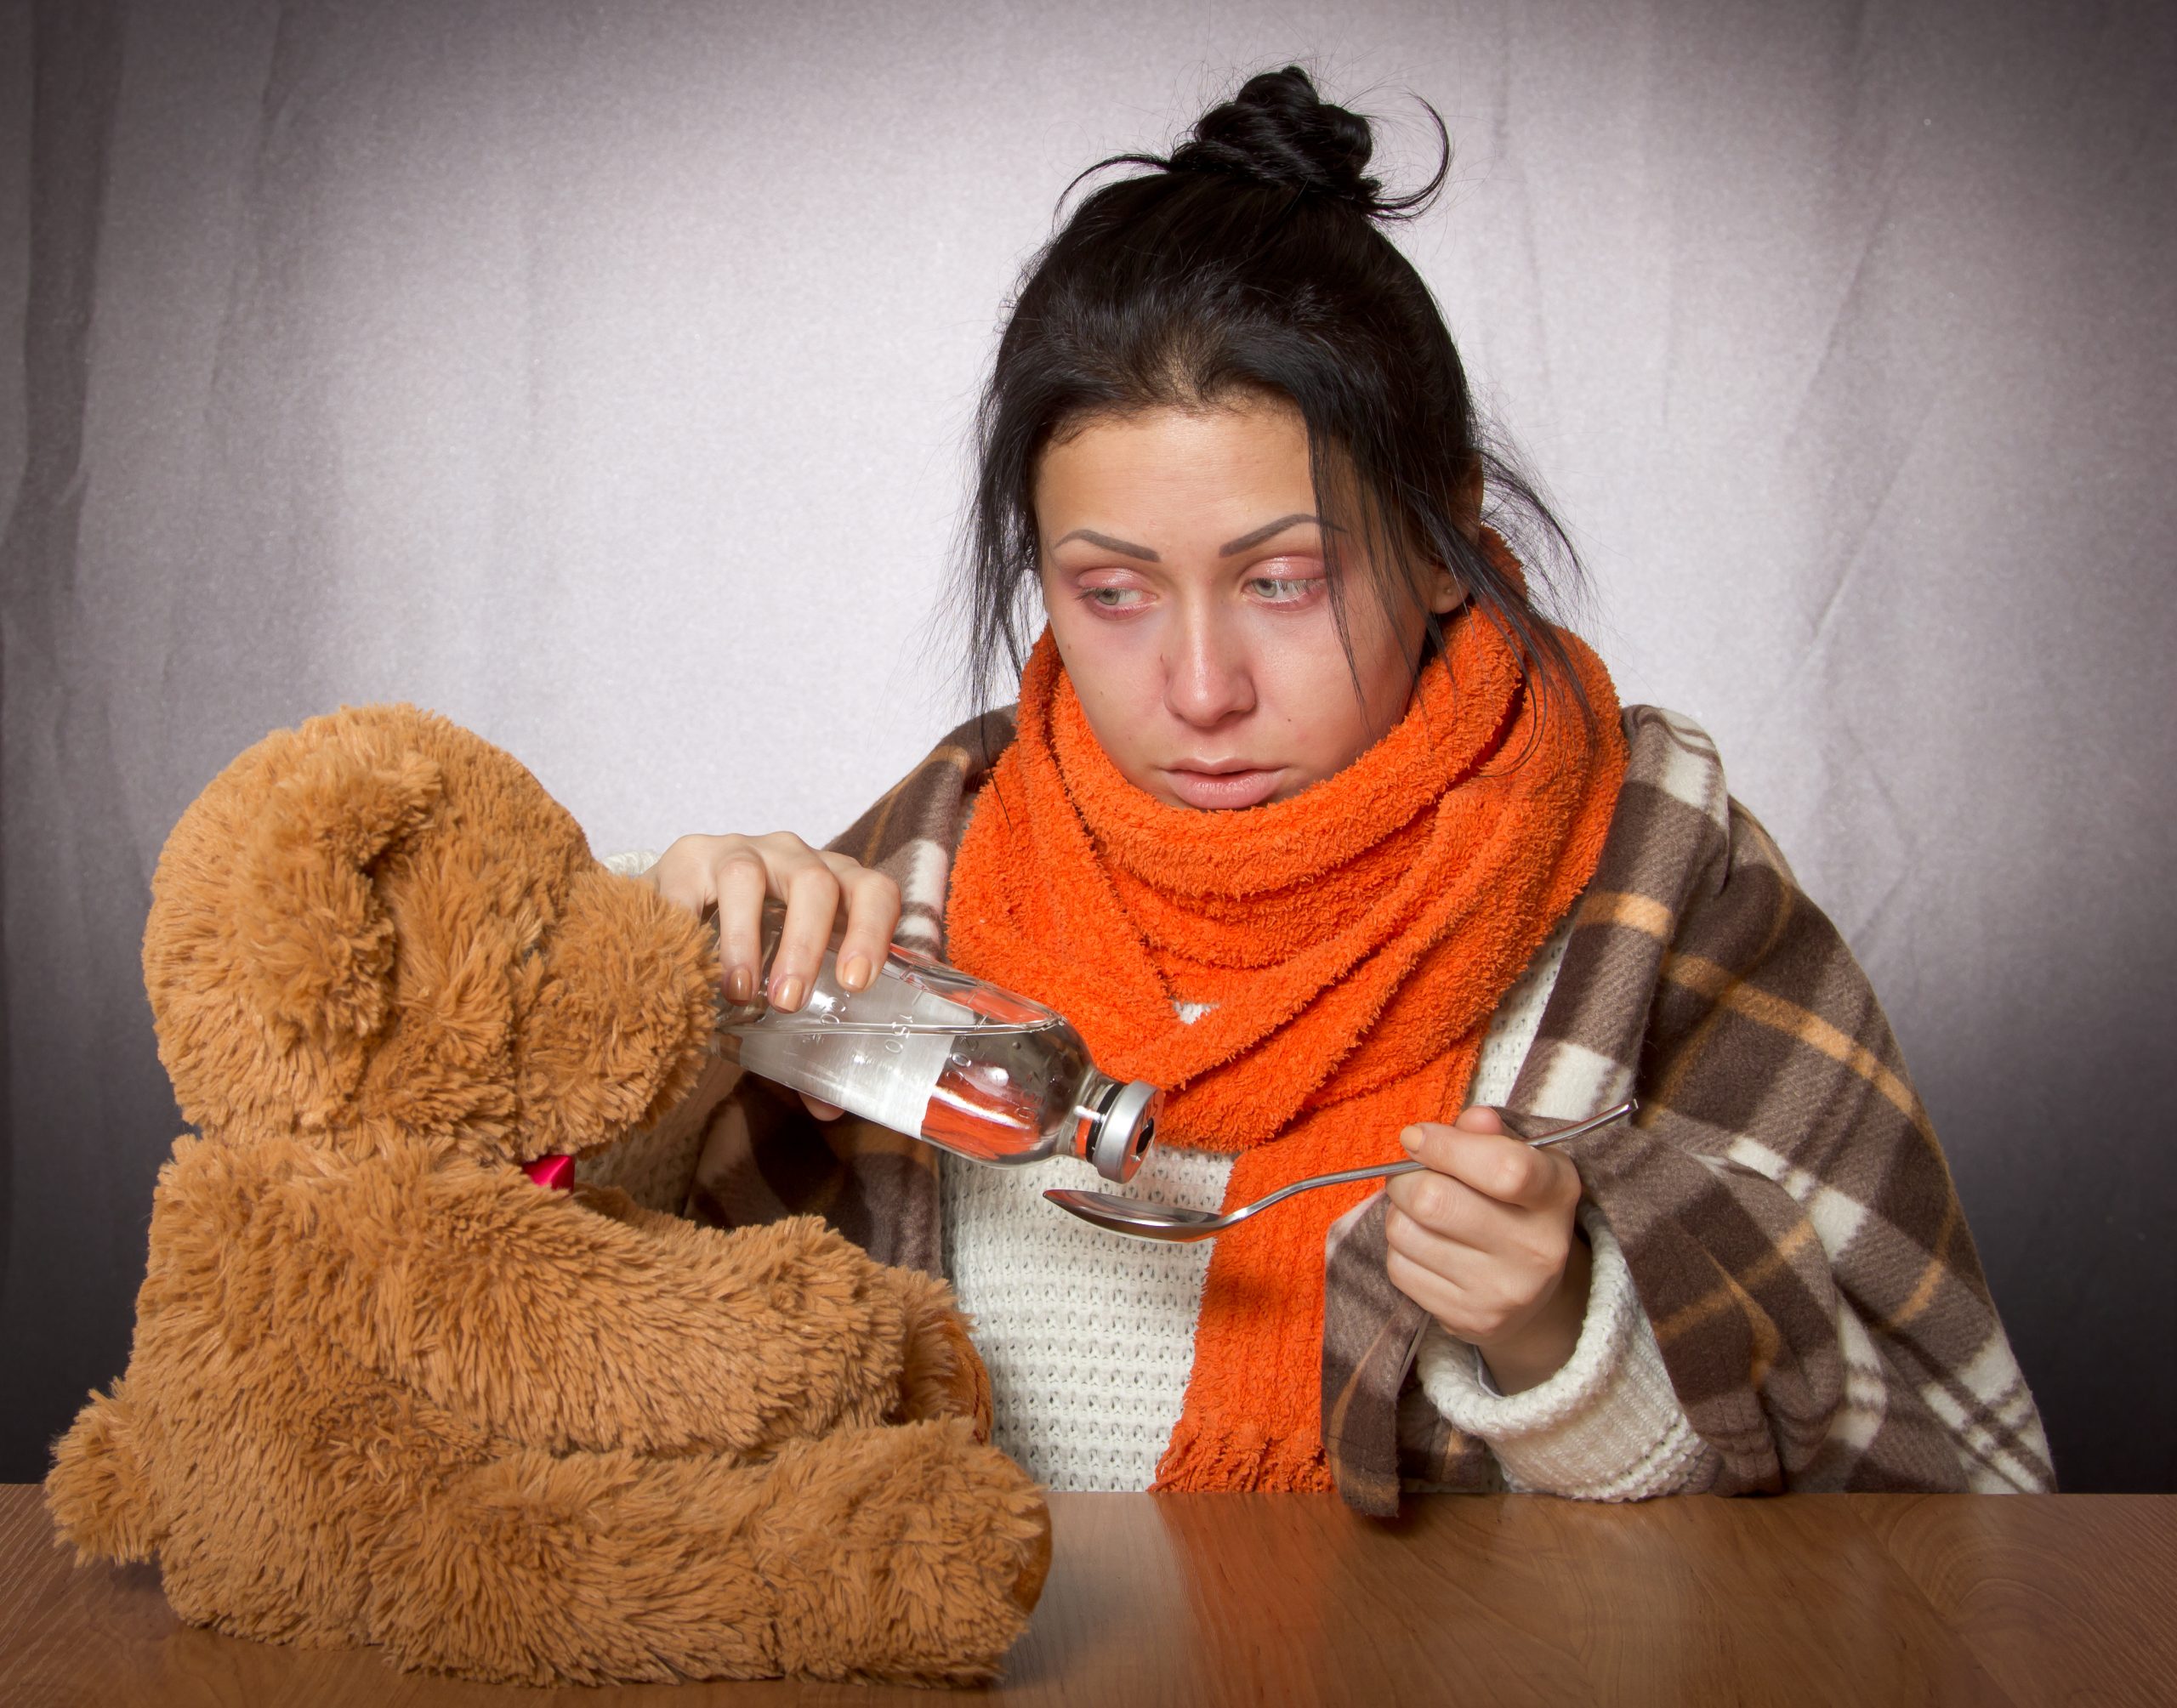 Image person pouring simulated medicine into a spoon while looking at a teddy bear